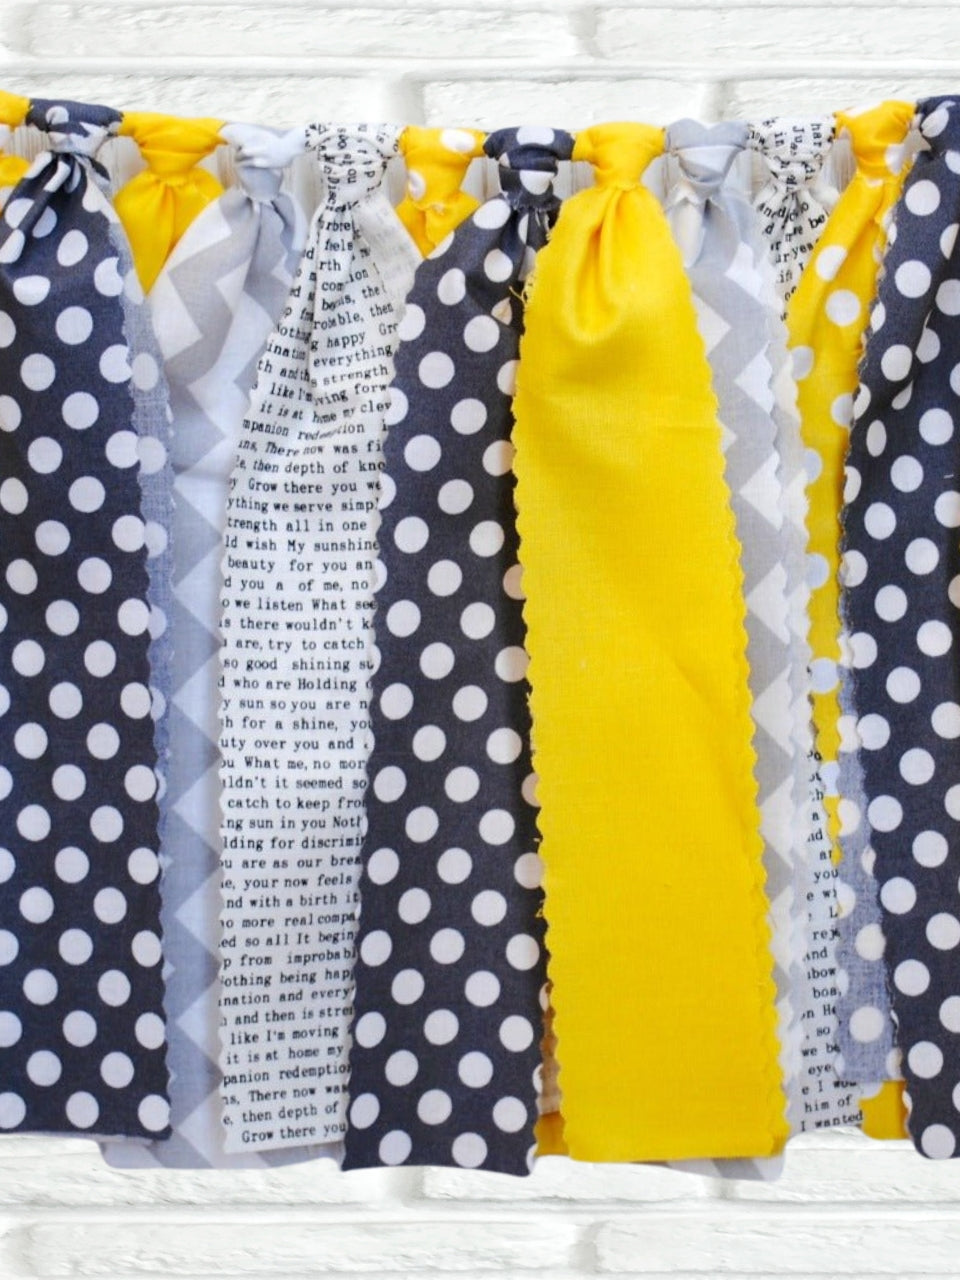 Mystery Party Yellow & Gray Fabric Bunting - FREE Shipping